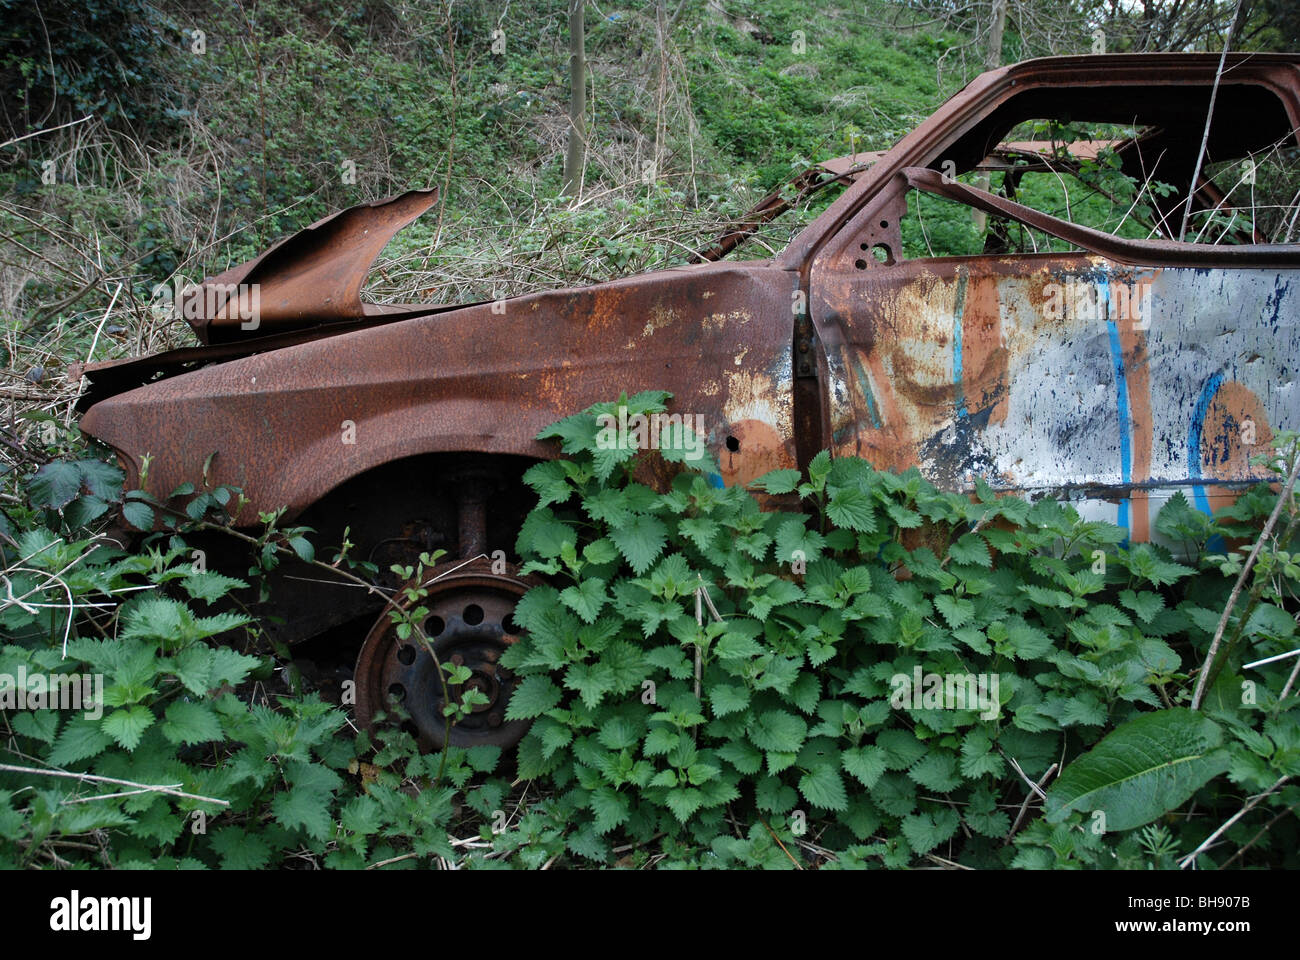 Stolen, burnt out, wrecked car abandoned and overgrown with nettles. Stock Photo